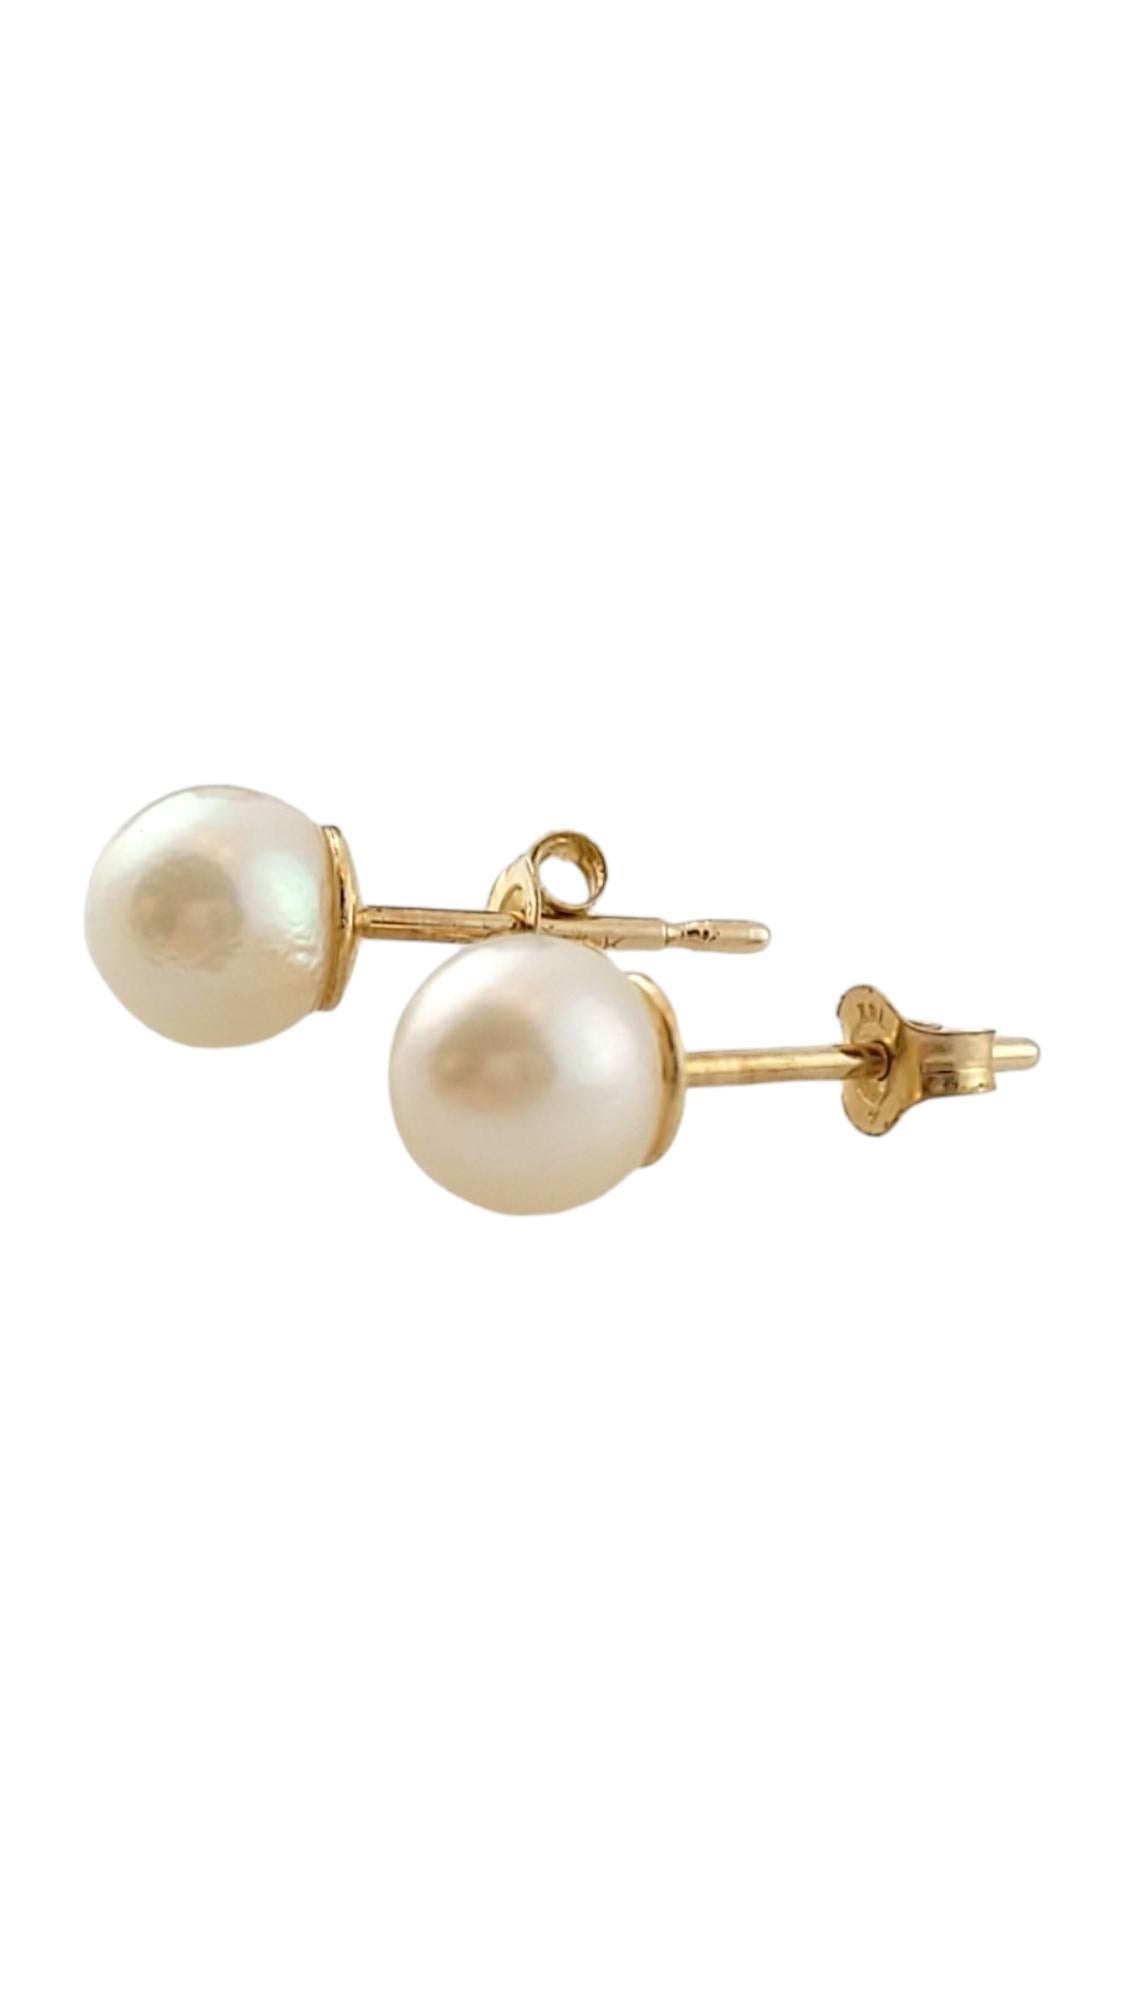 Brilliant Cut 14K Yellow Gold Pearl and Diamond Earrings #16465 For Sale